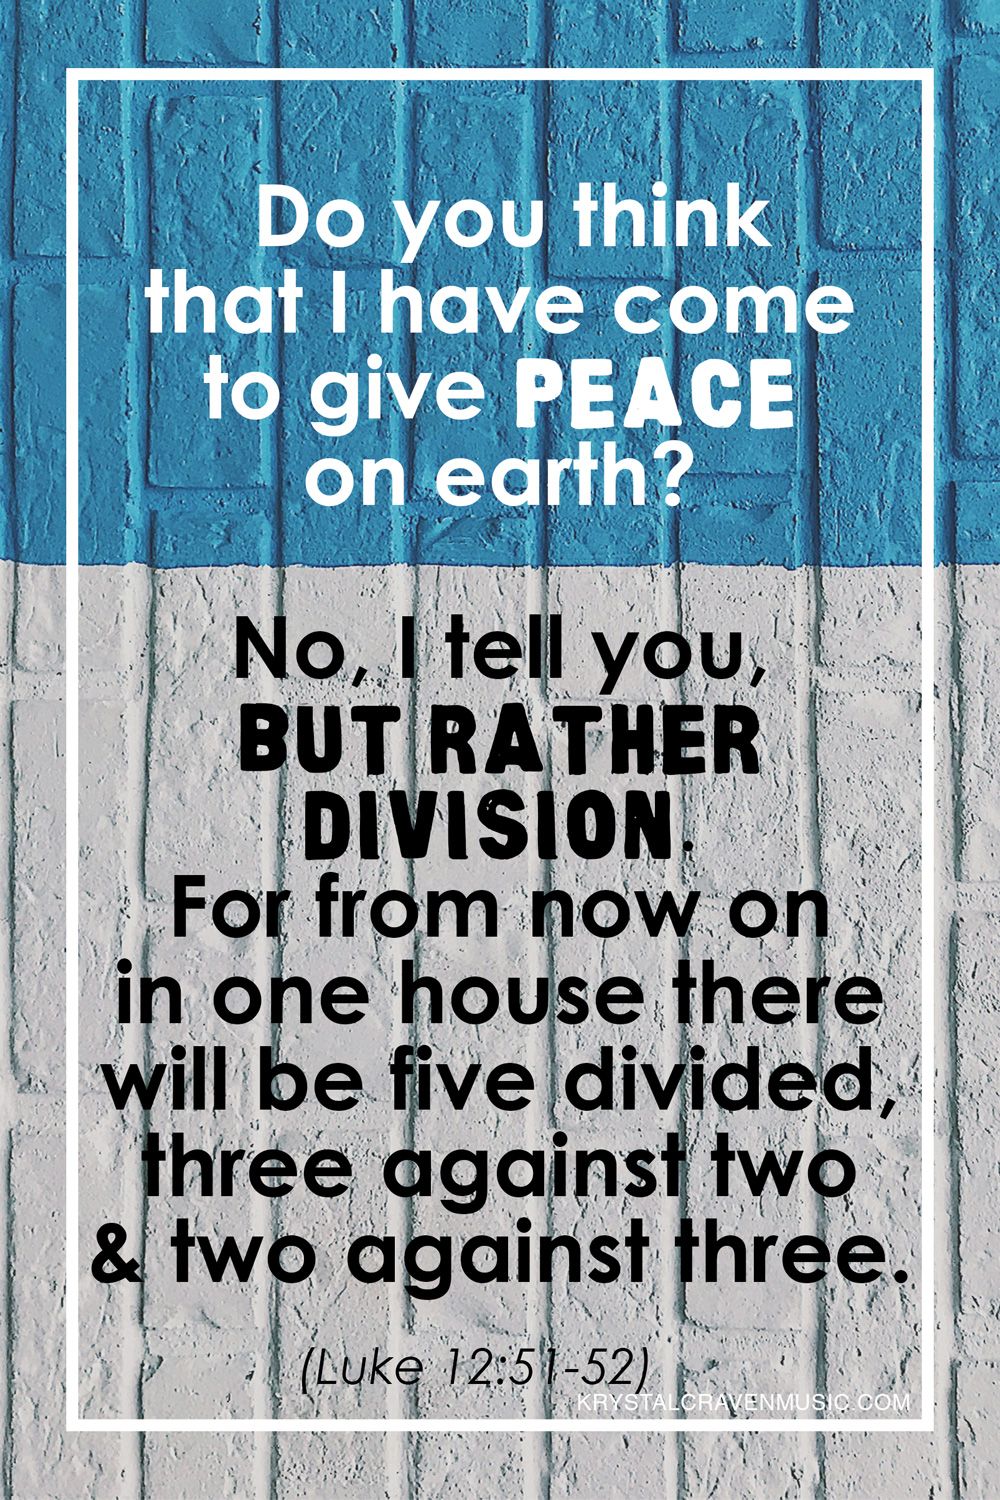 The text from Luke 12:51-52 "Do you think that I have come to give peace on earth? No, I tell you, but rather division. For from now on in one house there will be five divided, three against two and two against three." over a brick wall painted blue on the top and white on the bottom.